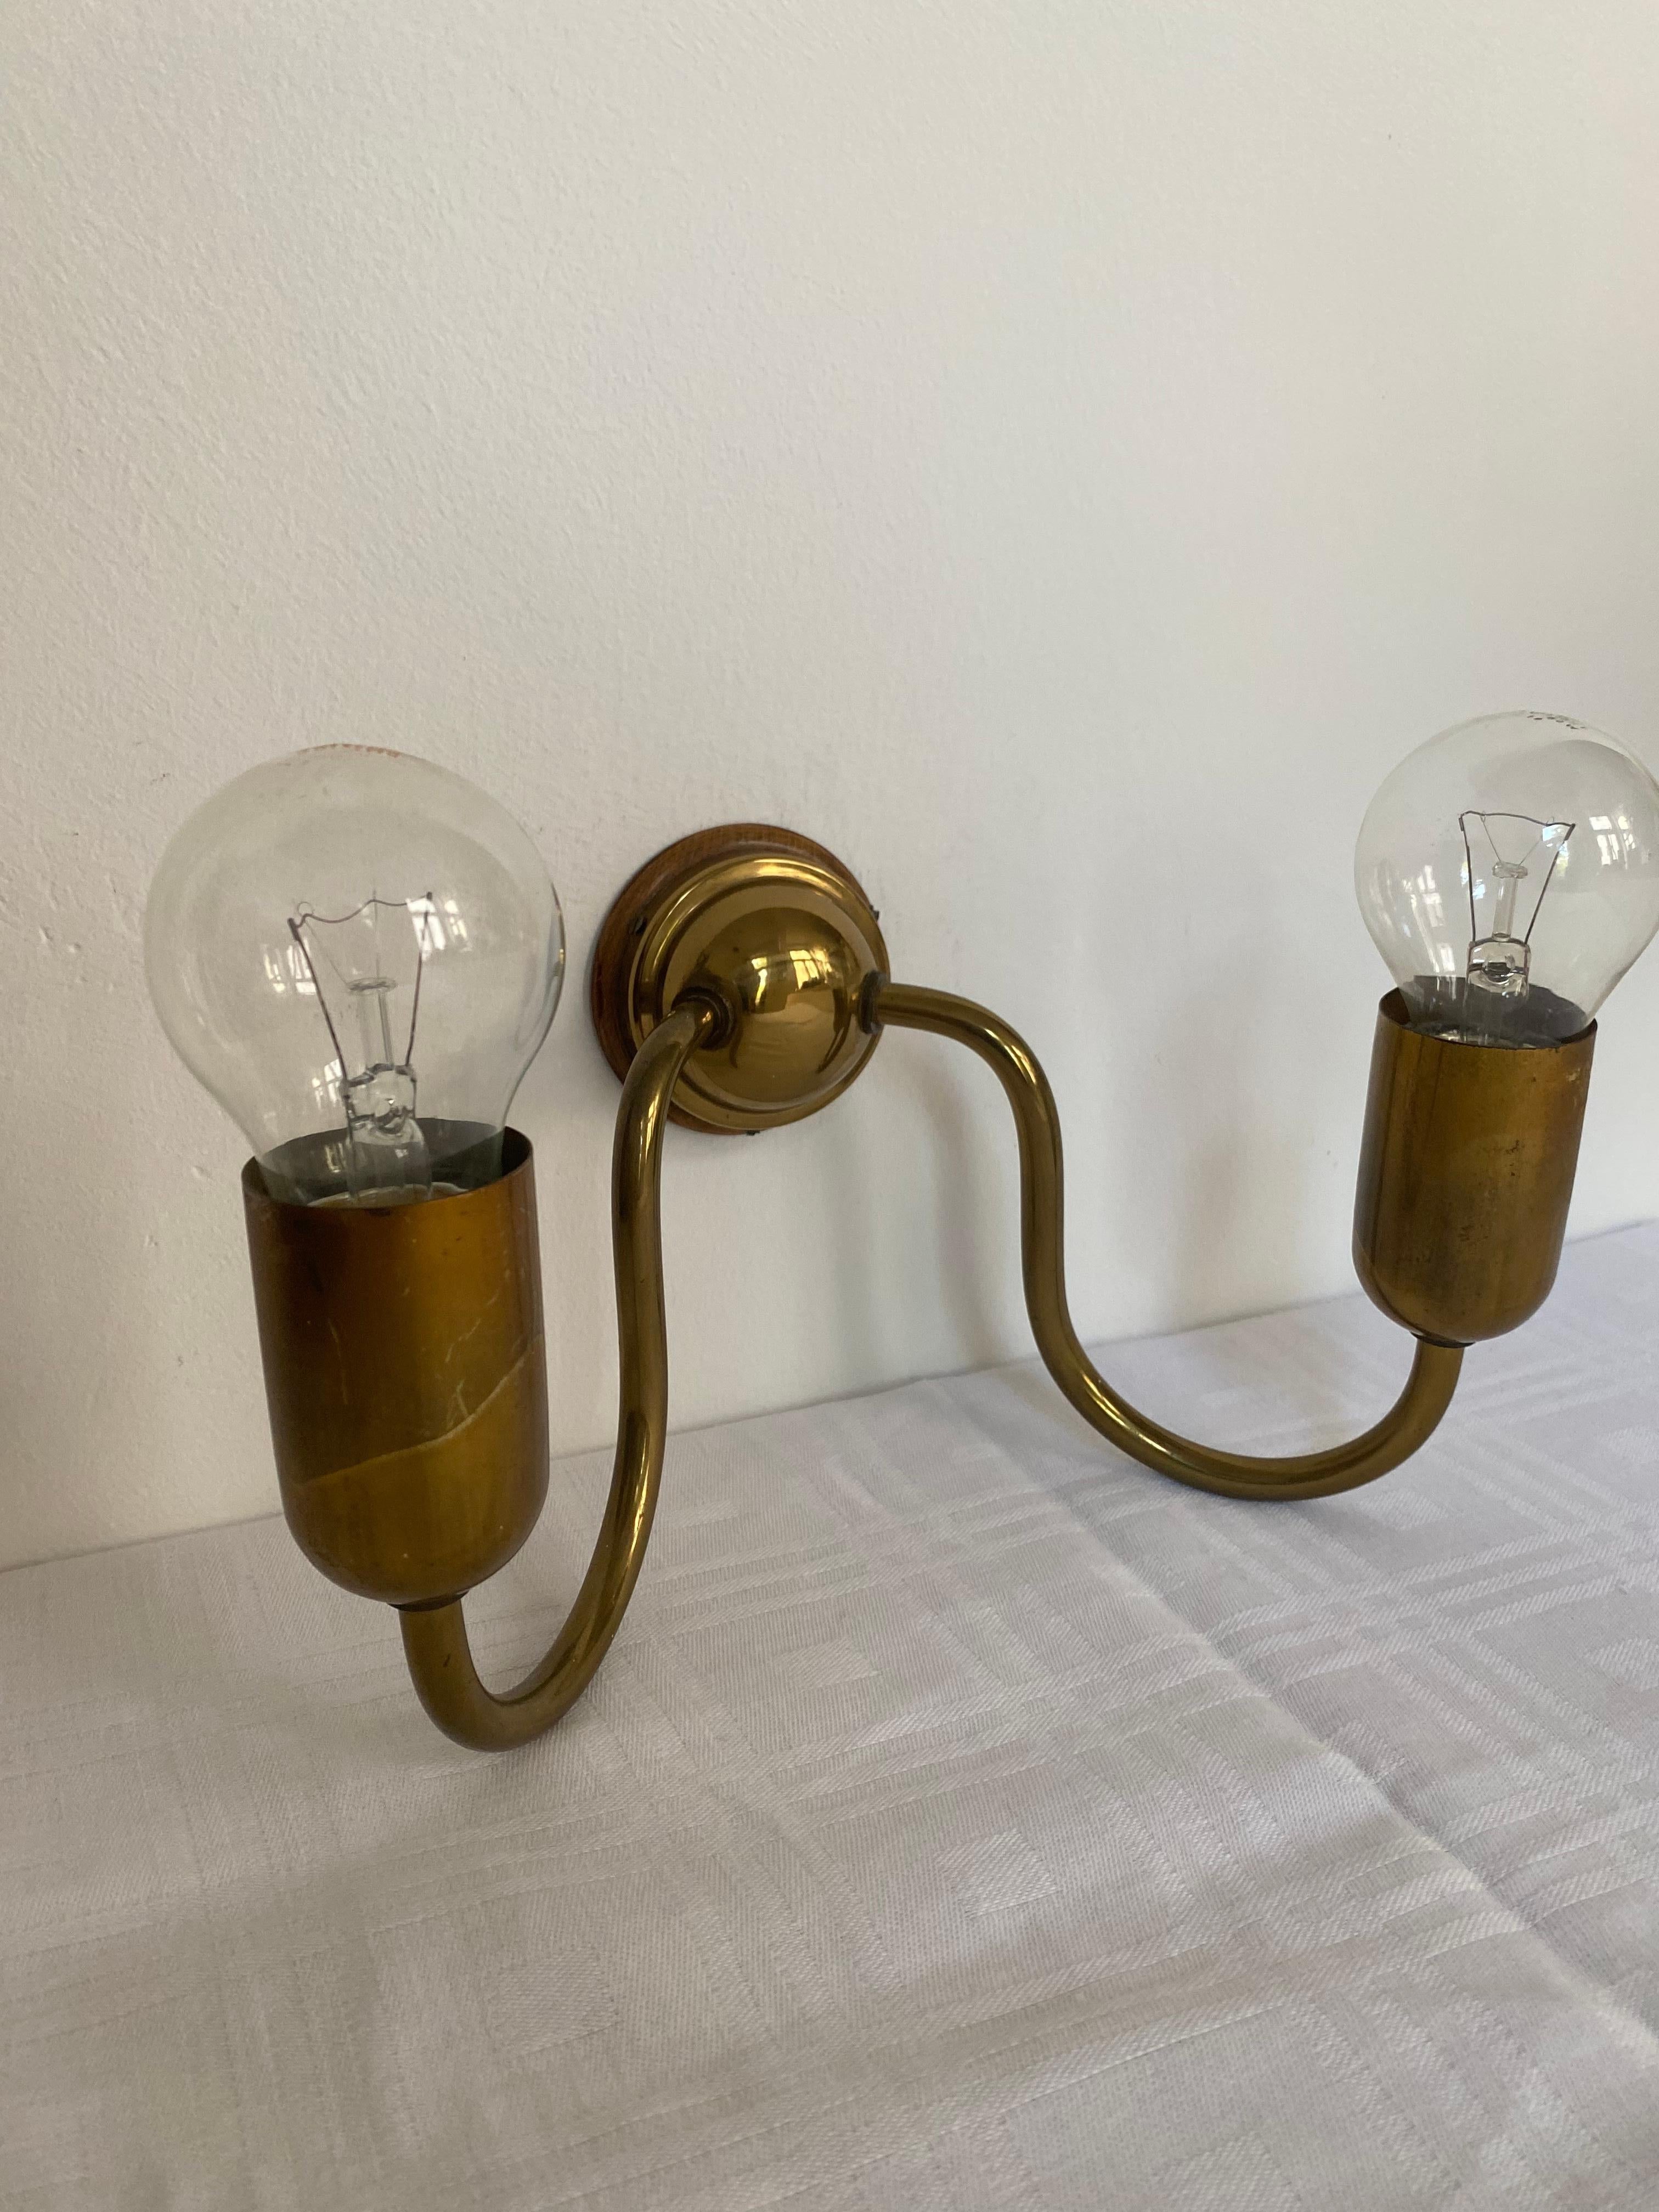 Rare sconces by the Austrian designer Josef Frank. Designed and made for the House and Garden shop in Vienna in the 1930‘s. This pair of sconces coms with the original wooden fixture to the wall and orig. weird. Weiring can be easily exchanged into